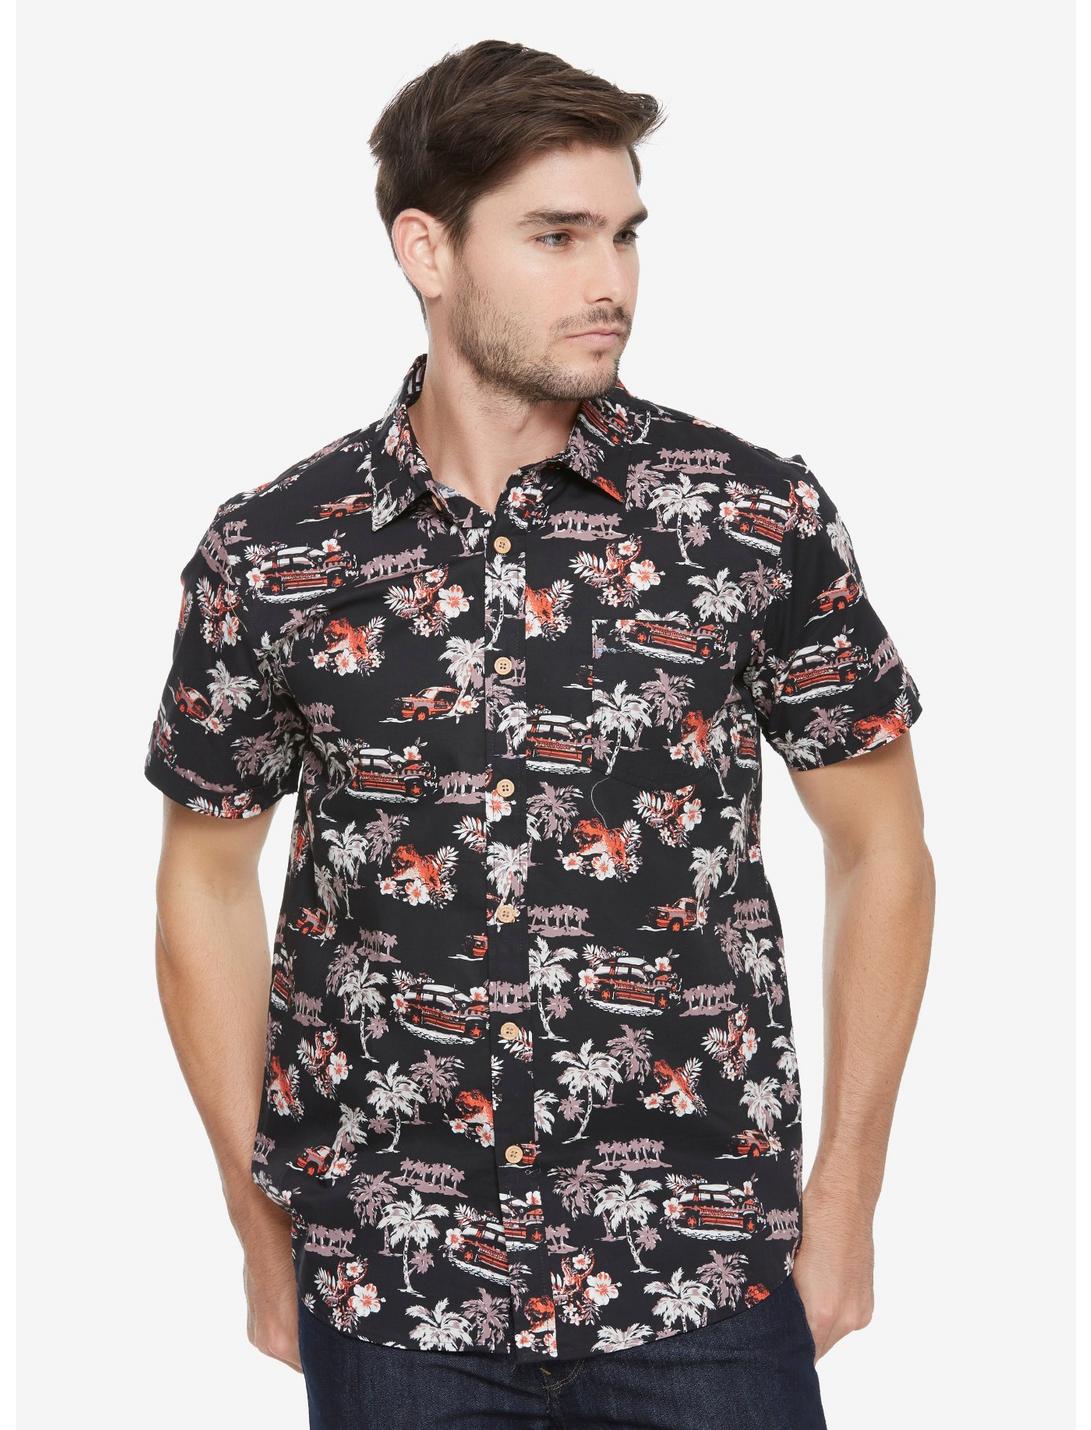 Jurassic Park Van Woven Button-Up - BoxLunch Exclusive, BLACK, hi-res